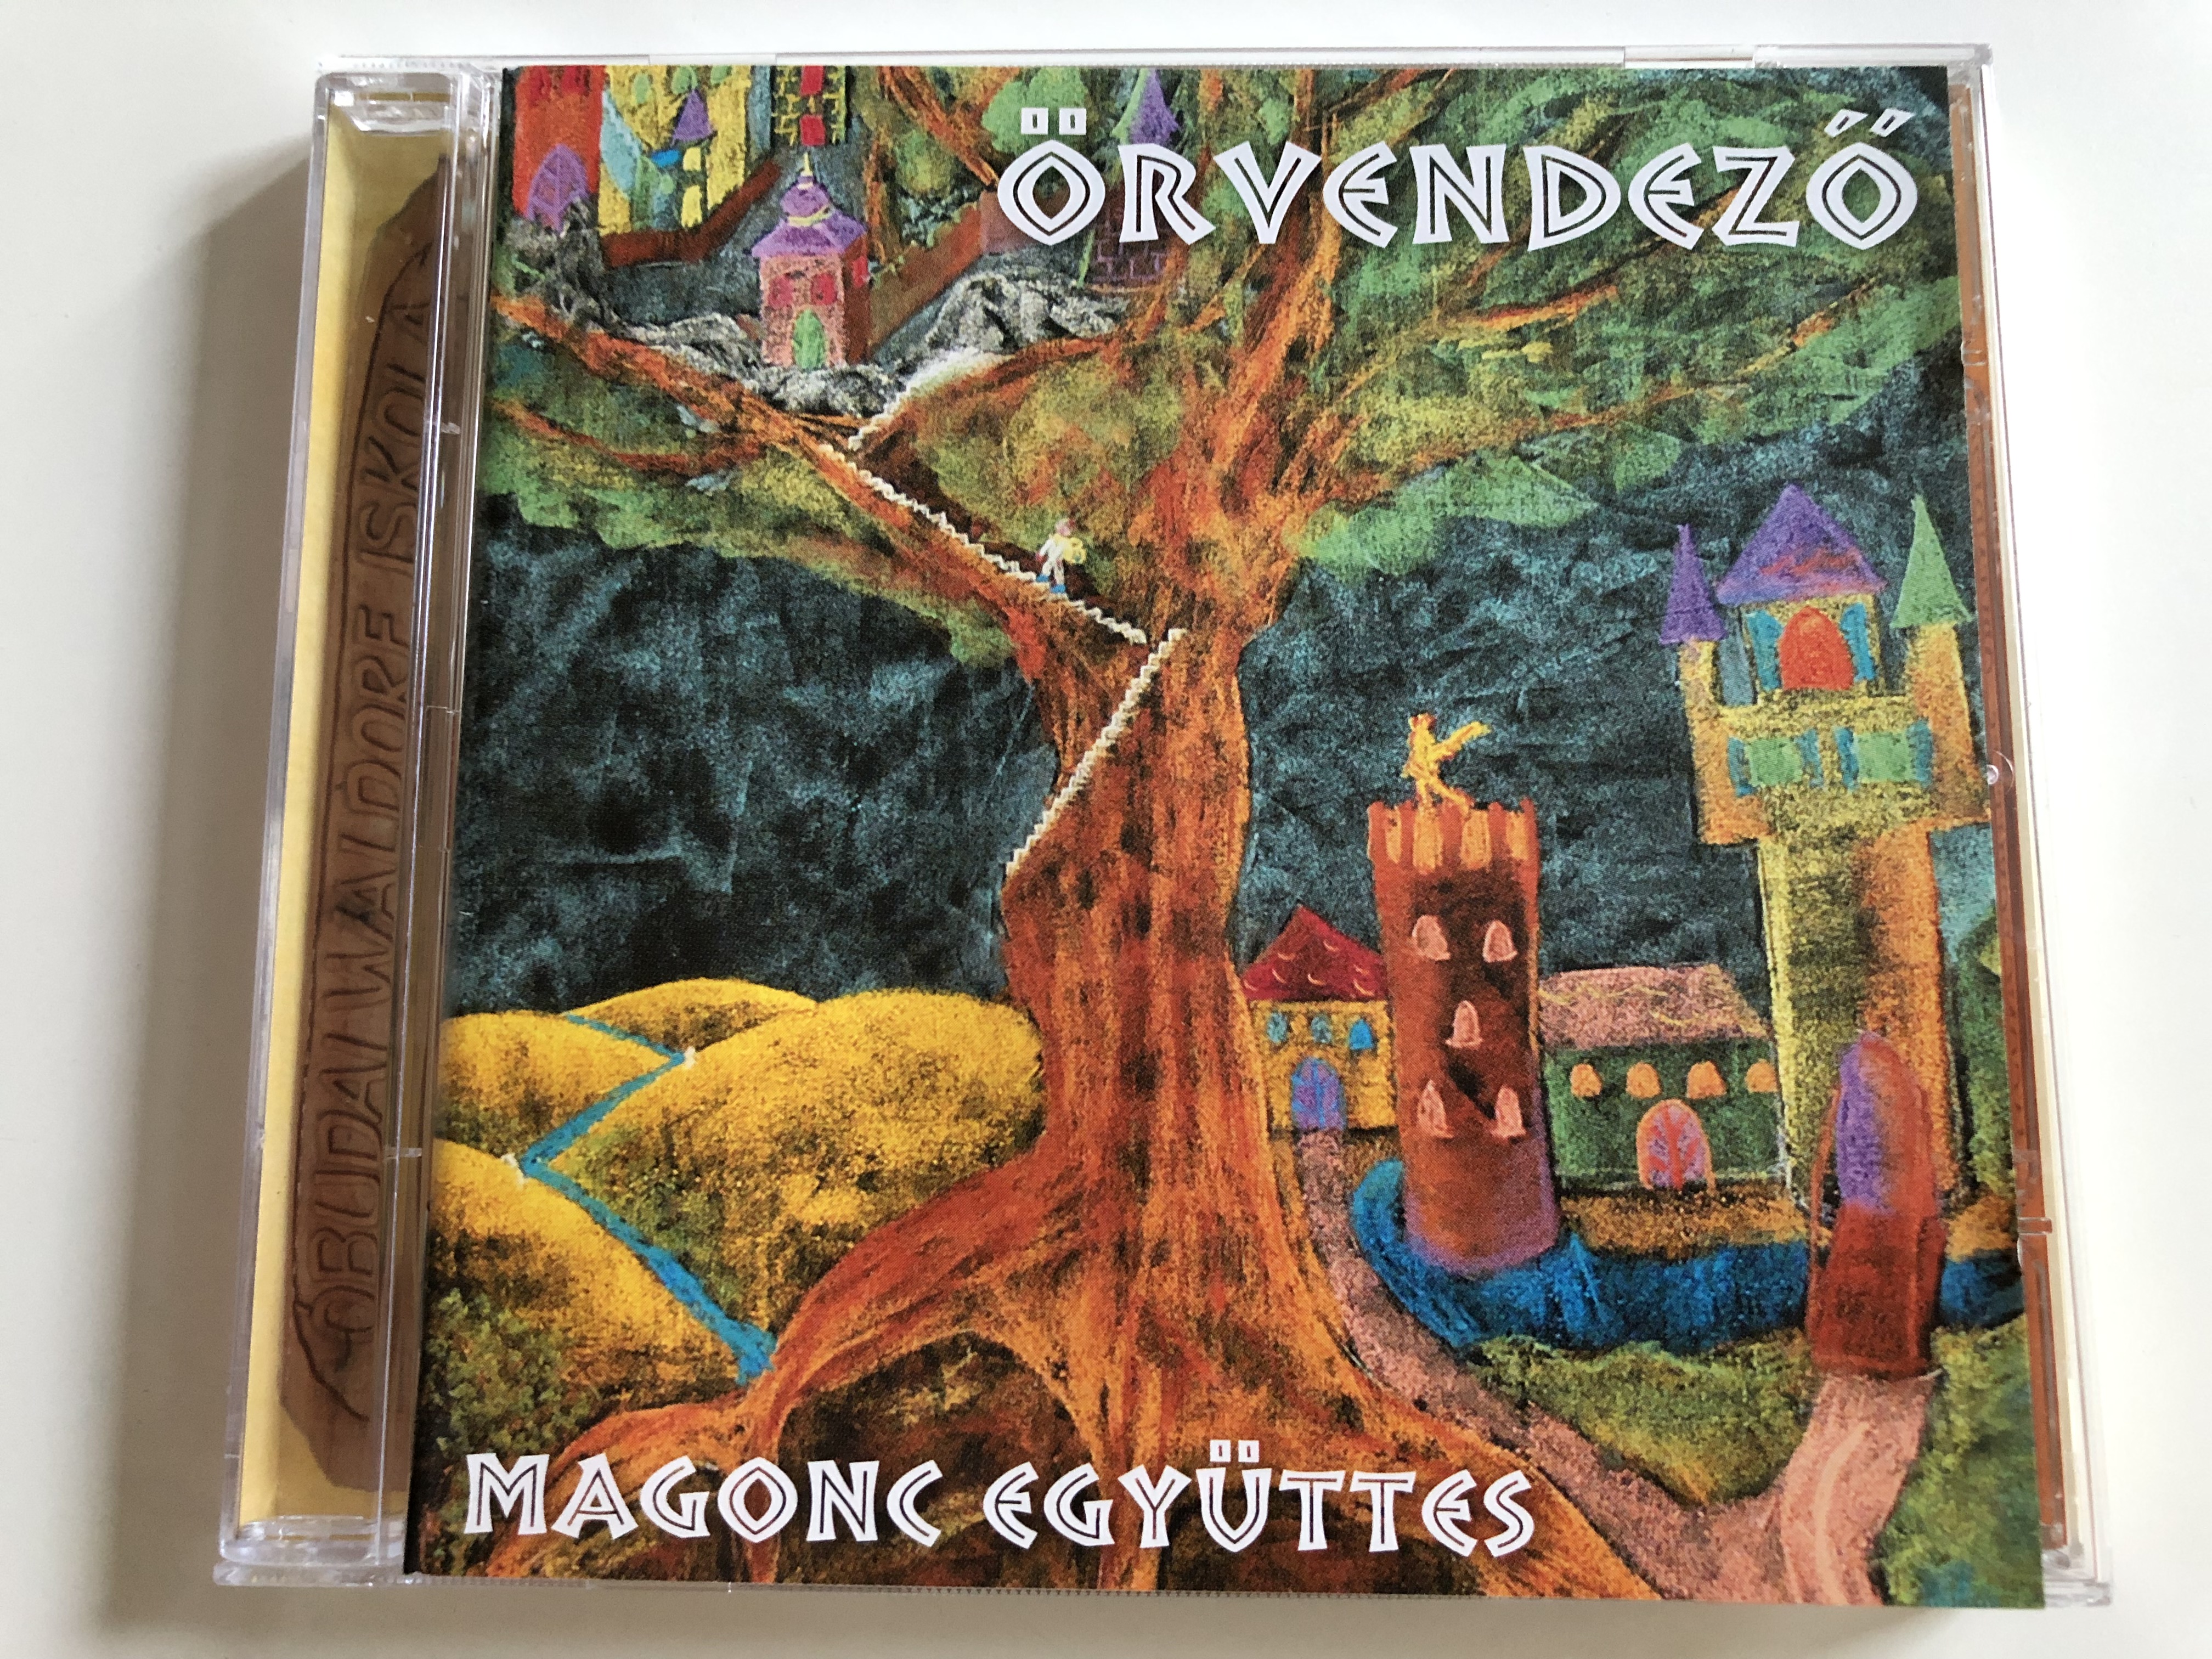 -magonc-egy-ttes-rvendez-audio-cd-2008-recorded-at-the-buda-waldorf-school-hungarian-children-s-songs-and-rhymes-1-.jpg